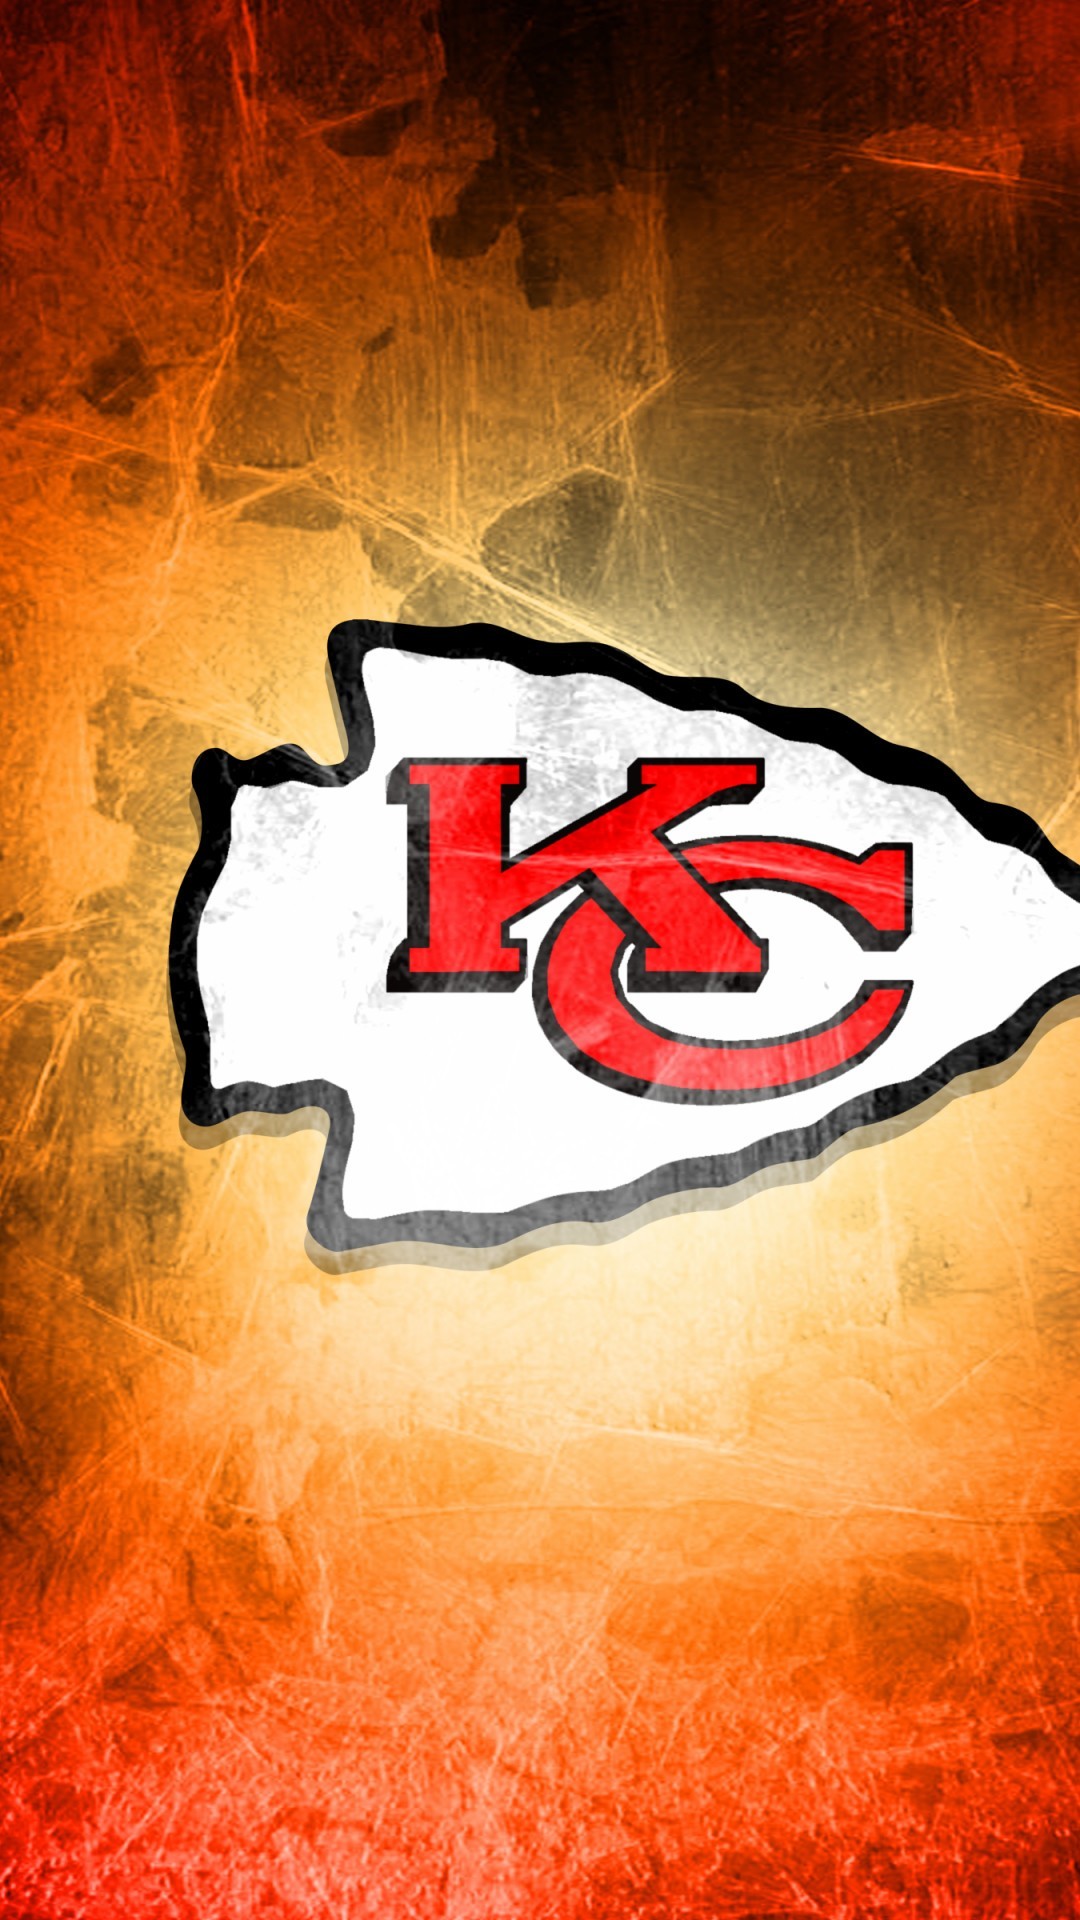 Kansas City Chiefs iPhone Home Screen Wallpaper With high-resolution 1080X1920 pixel. Download and set as wallpaper for Desktop Computer, Apple iPhone X, XS Max, XR, 8, 7, 6, SE, iPad, Android